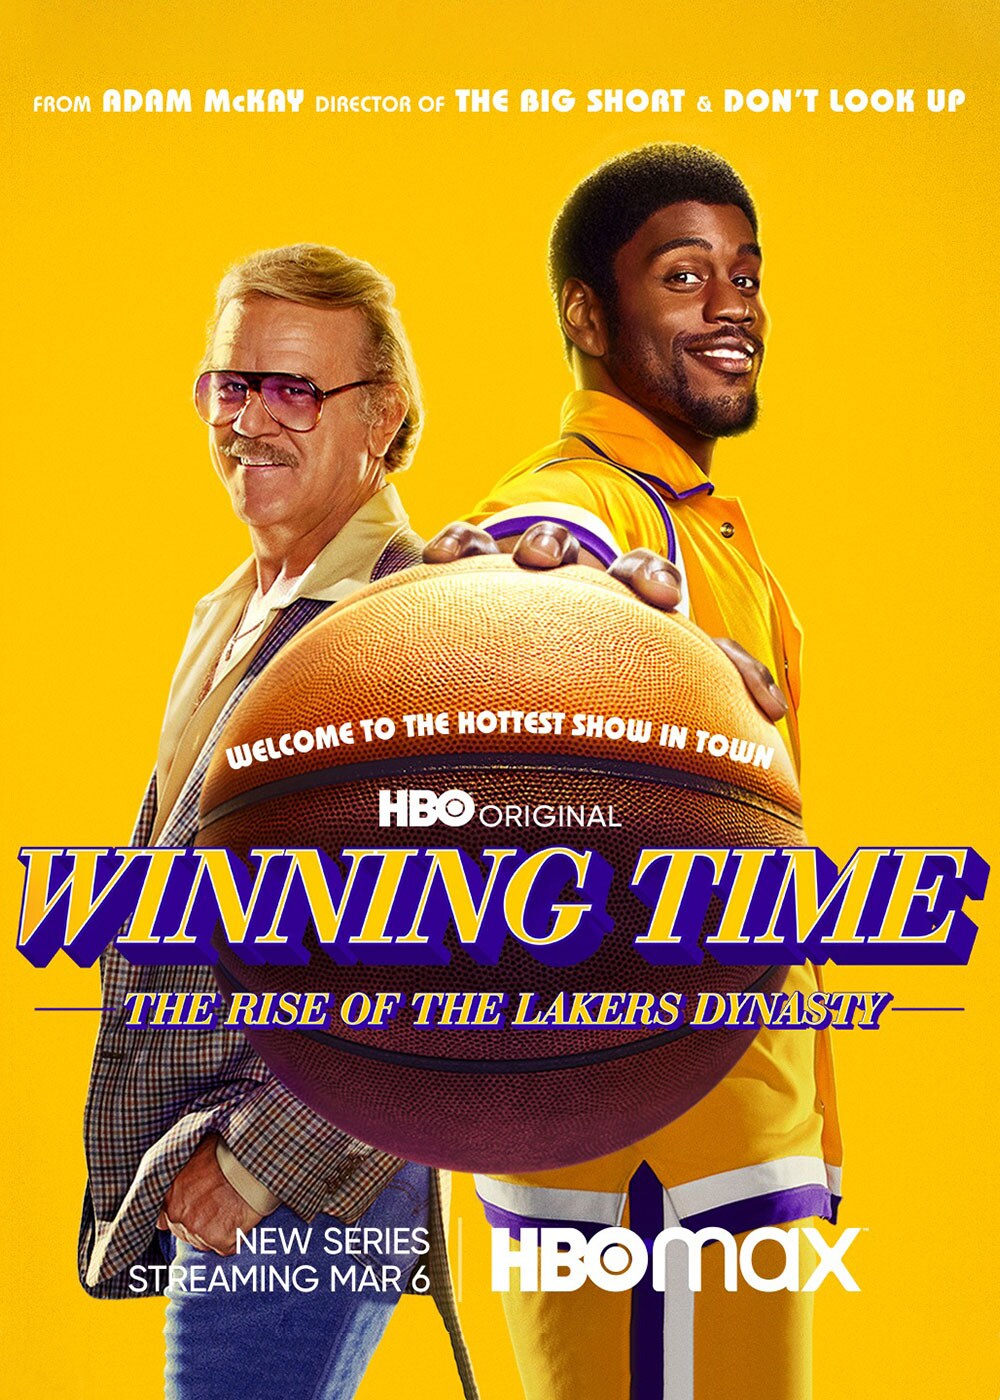 Adam McKay scores with HBO's Winning Time: The Rise of the Lakers Dynasty